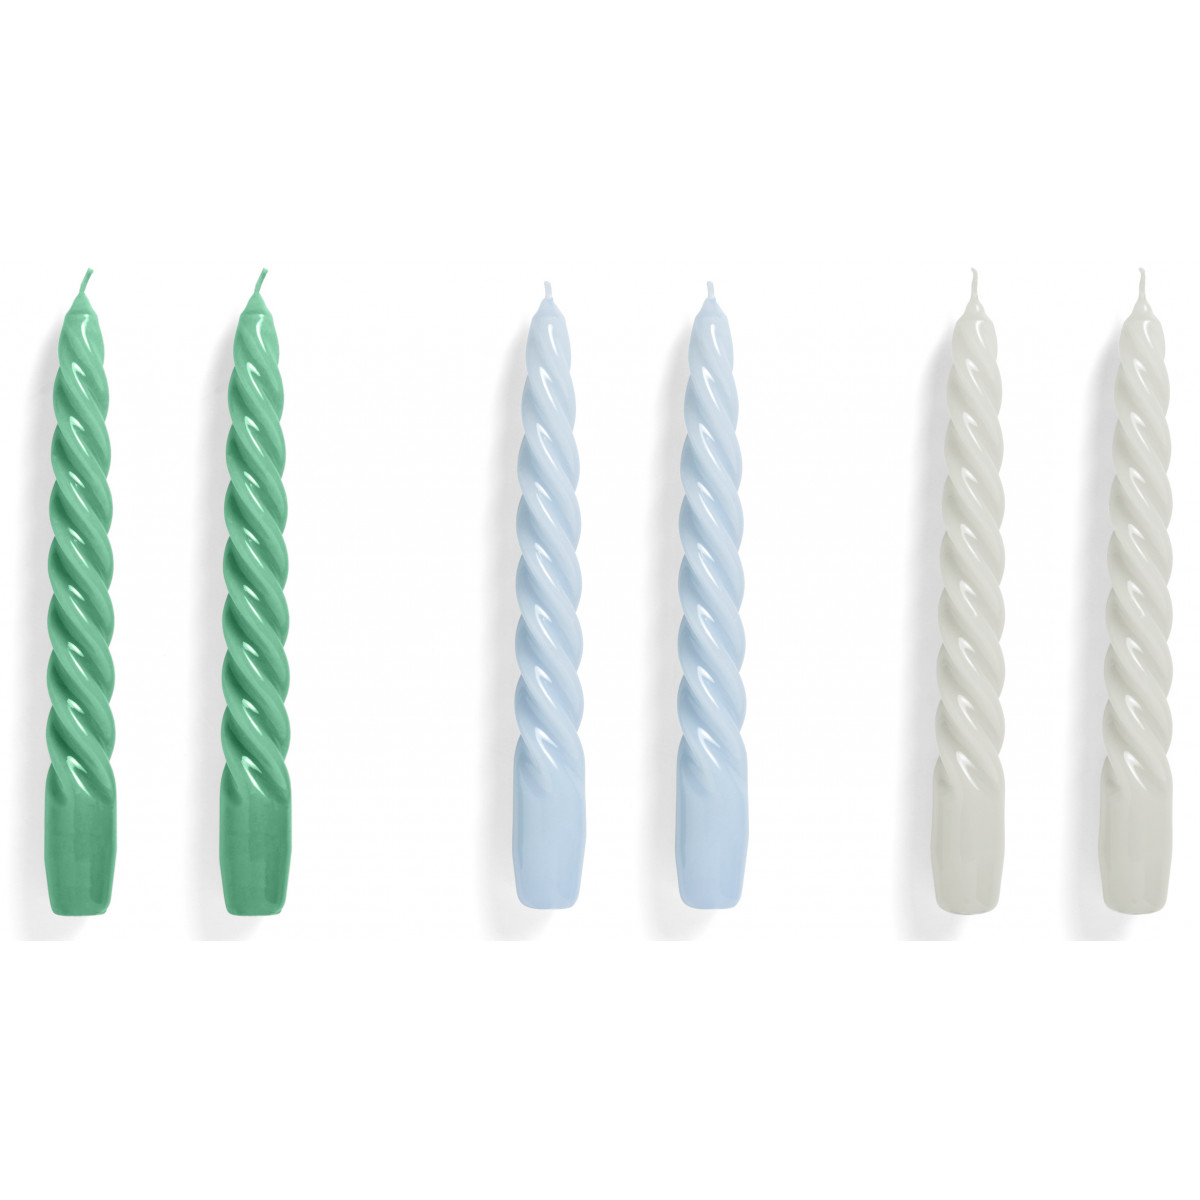 Twist candles set of 6 - green light, blue light and grey